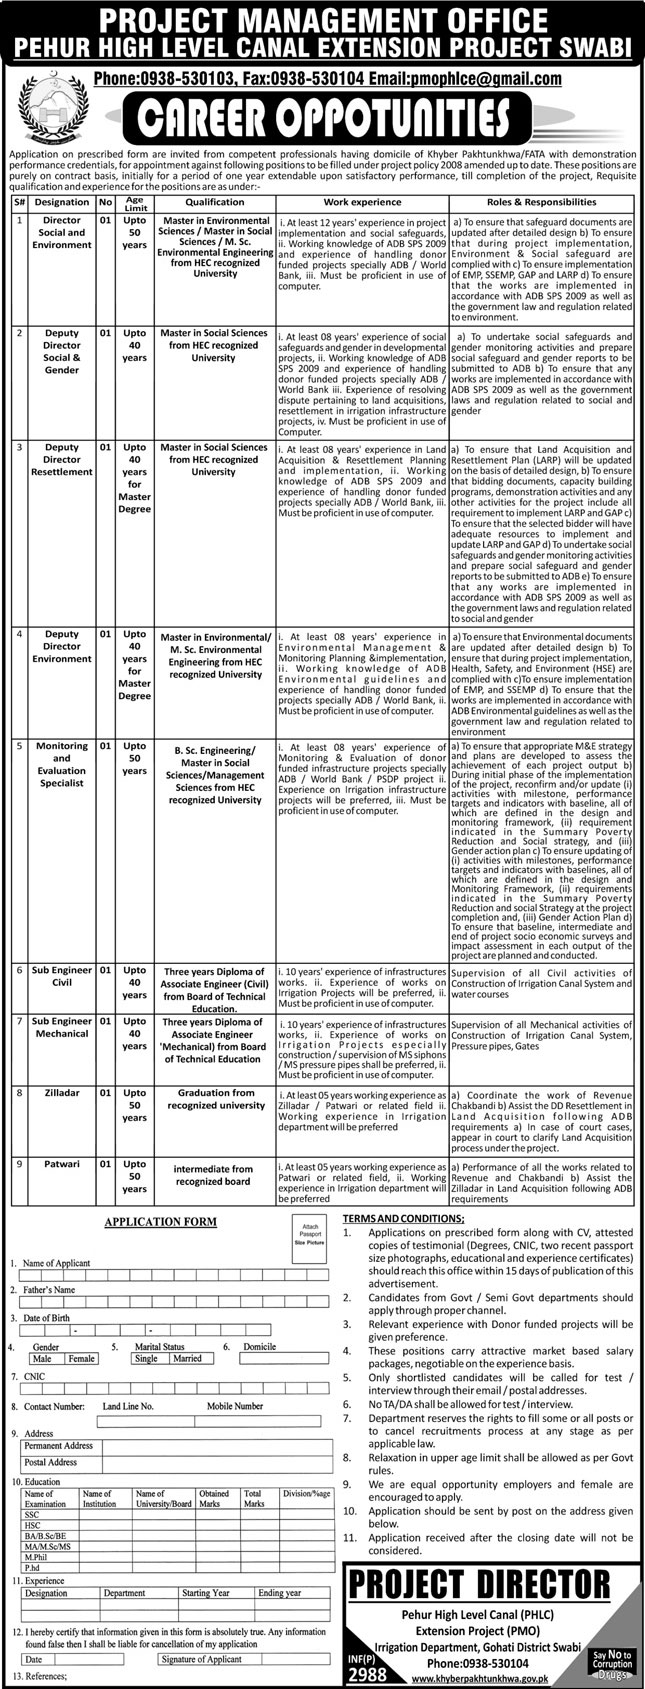 Pehur High-Level Canal Extension Project Jobs Swabi 2018